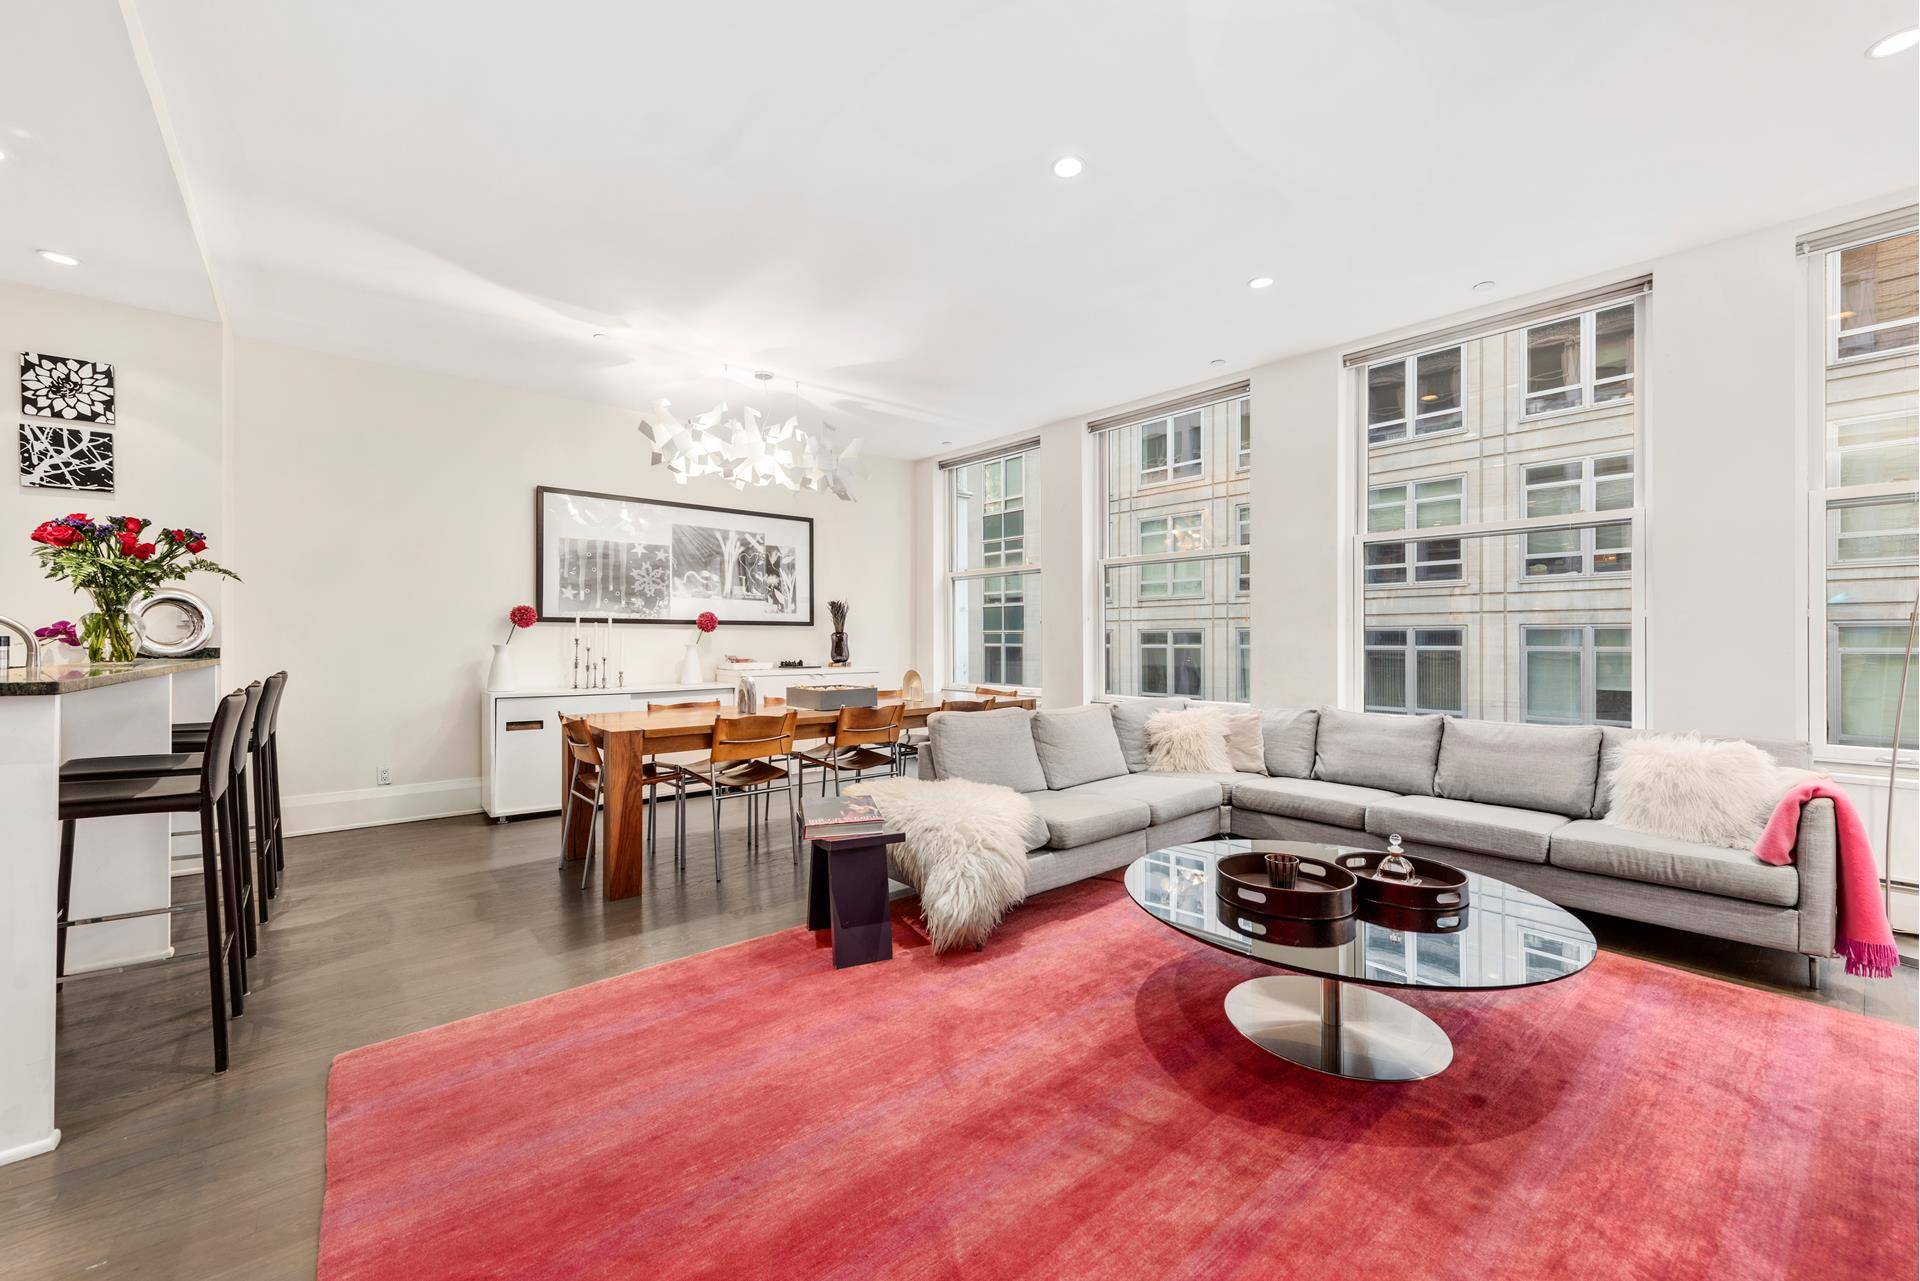 Beautiful, thoughtfully designed 2 bedroom 2 bath downtown loft jewel at the elegant prewar Fulton Chambers, a boutique condominium in the heart of the Financial District.